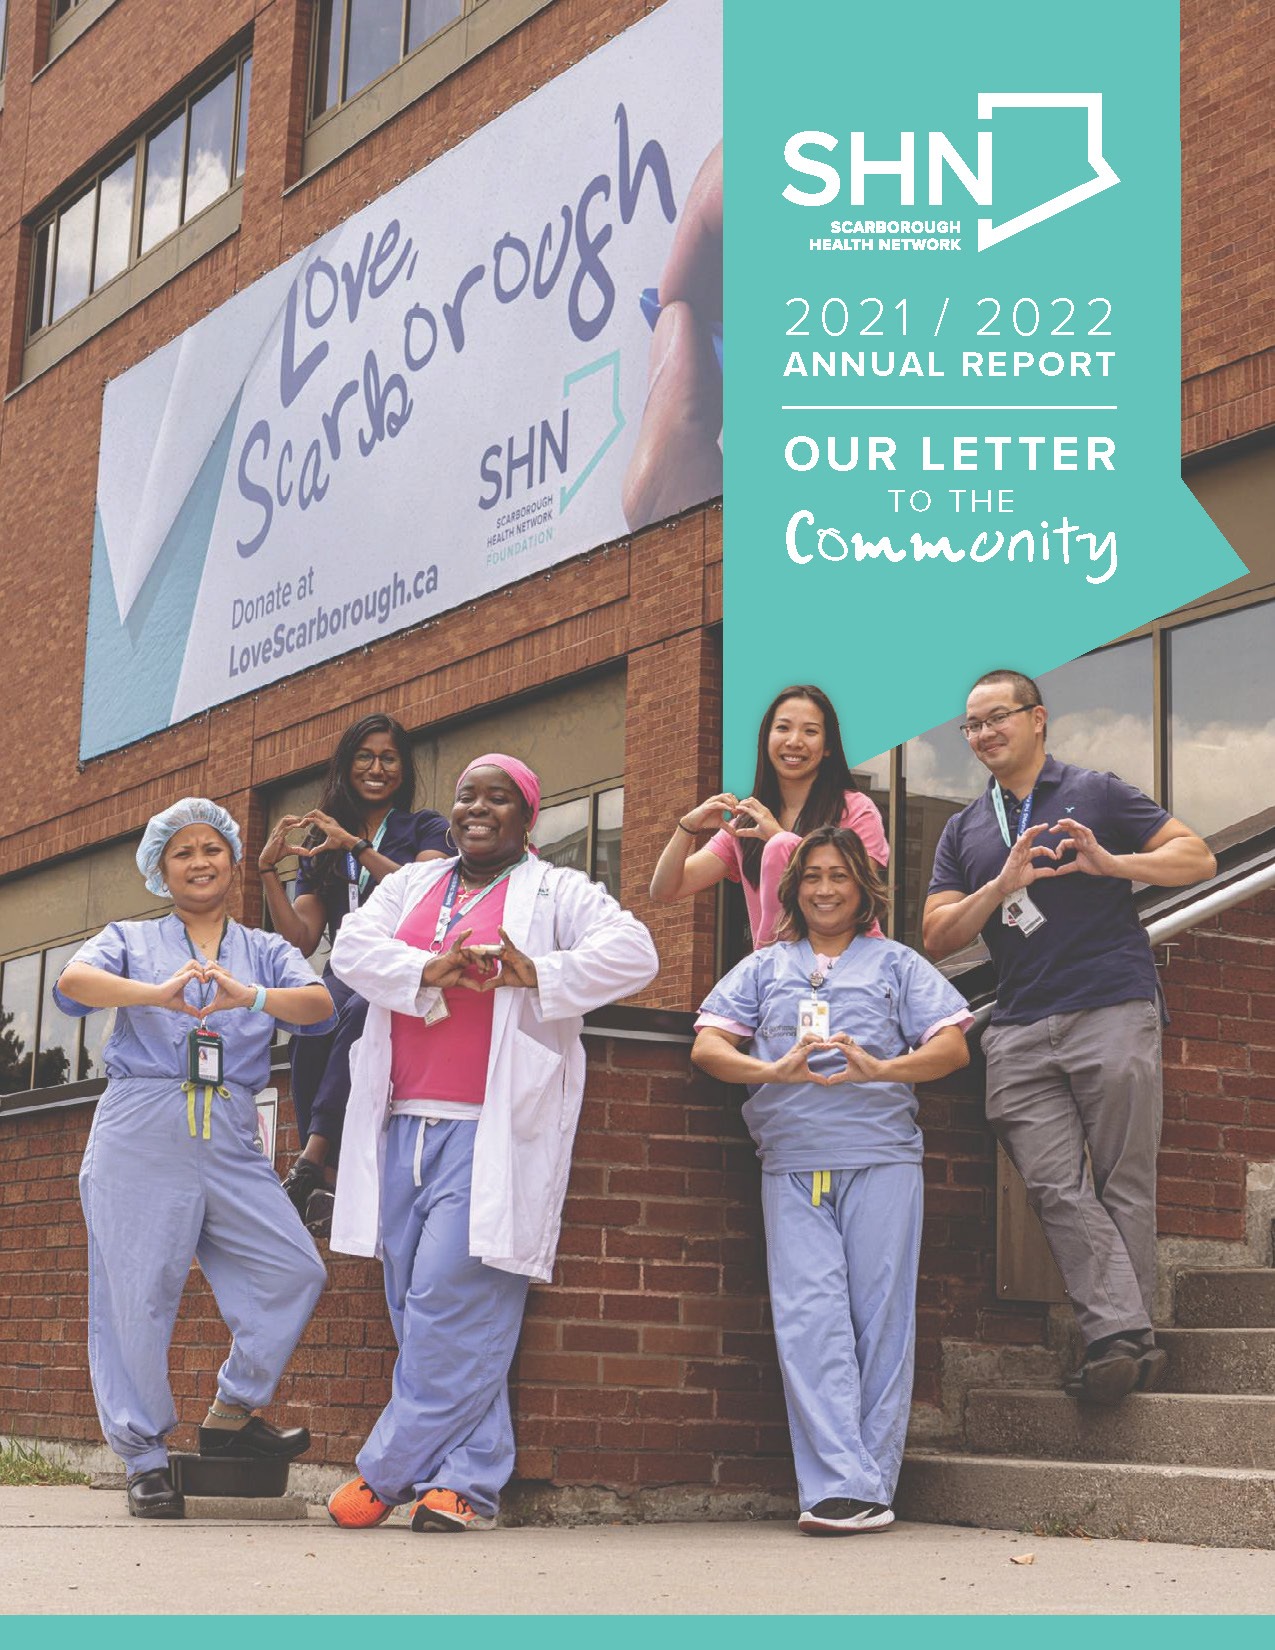 SHN staff forming a heart with their hands for the cover of SHN and SHN Foundation's 2021-2022 joint Annual Report